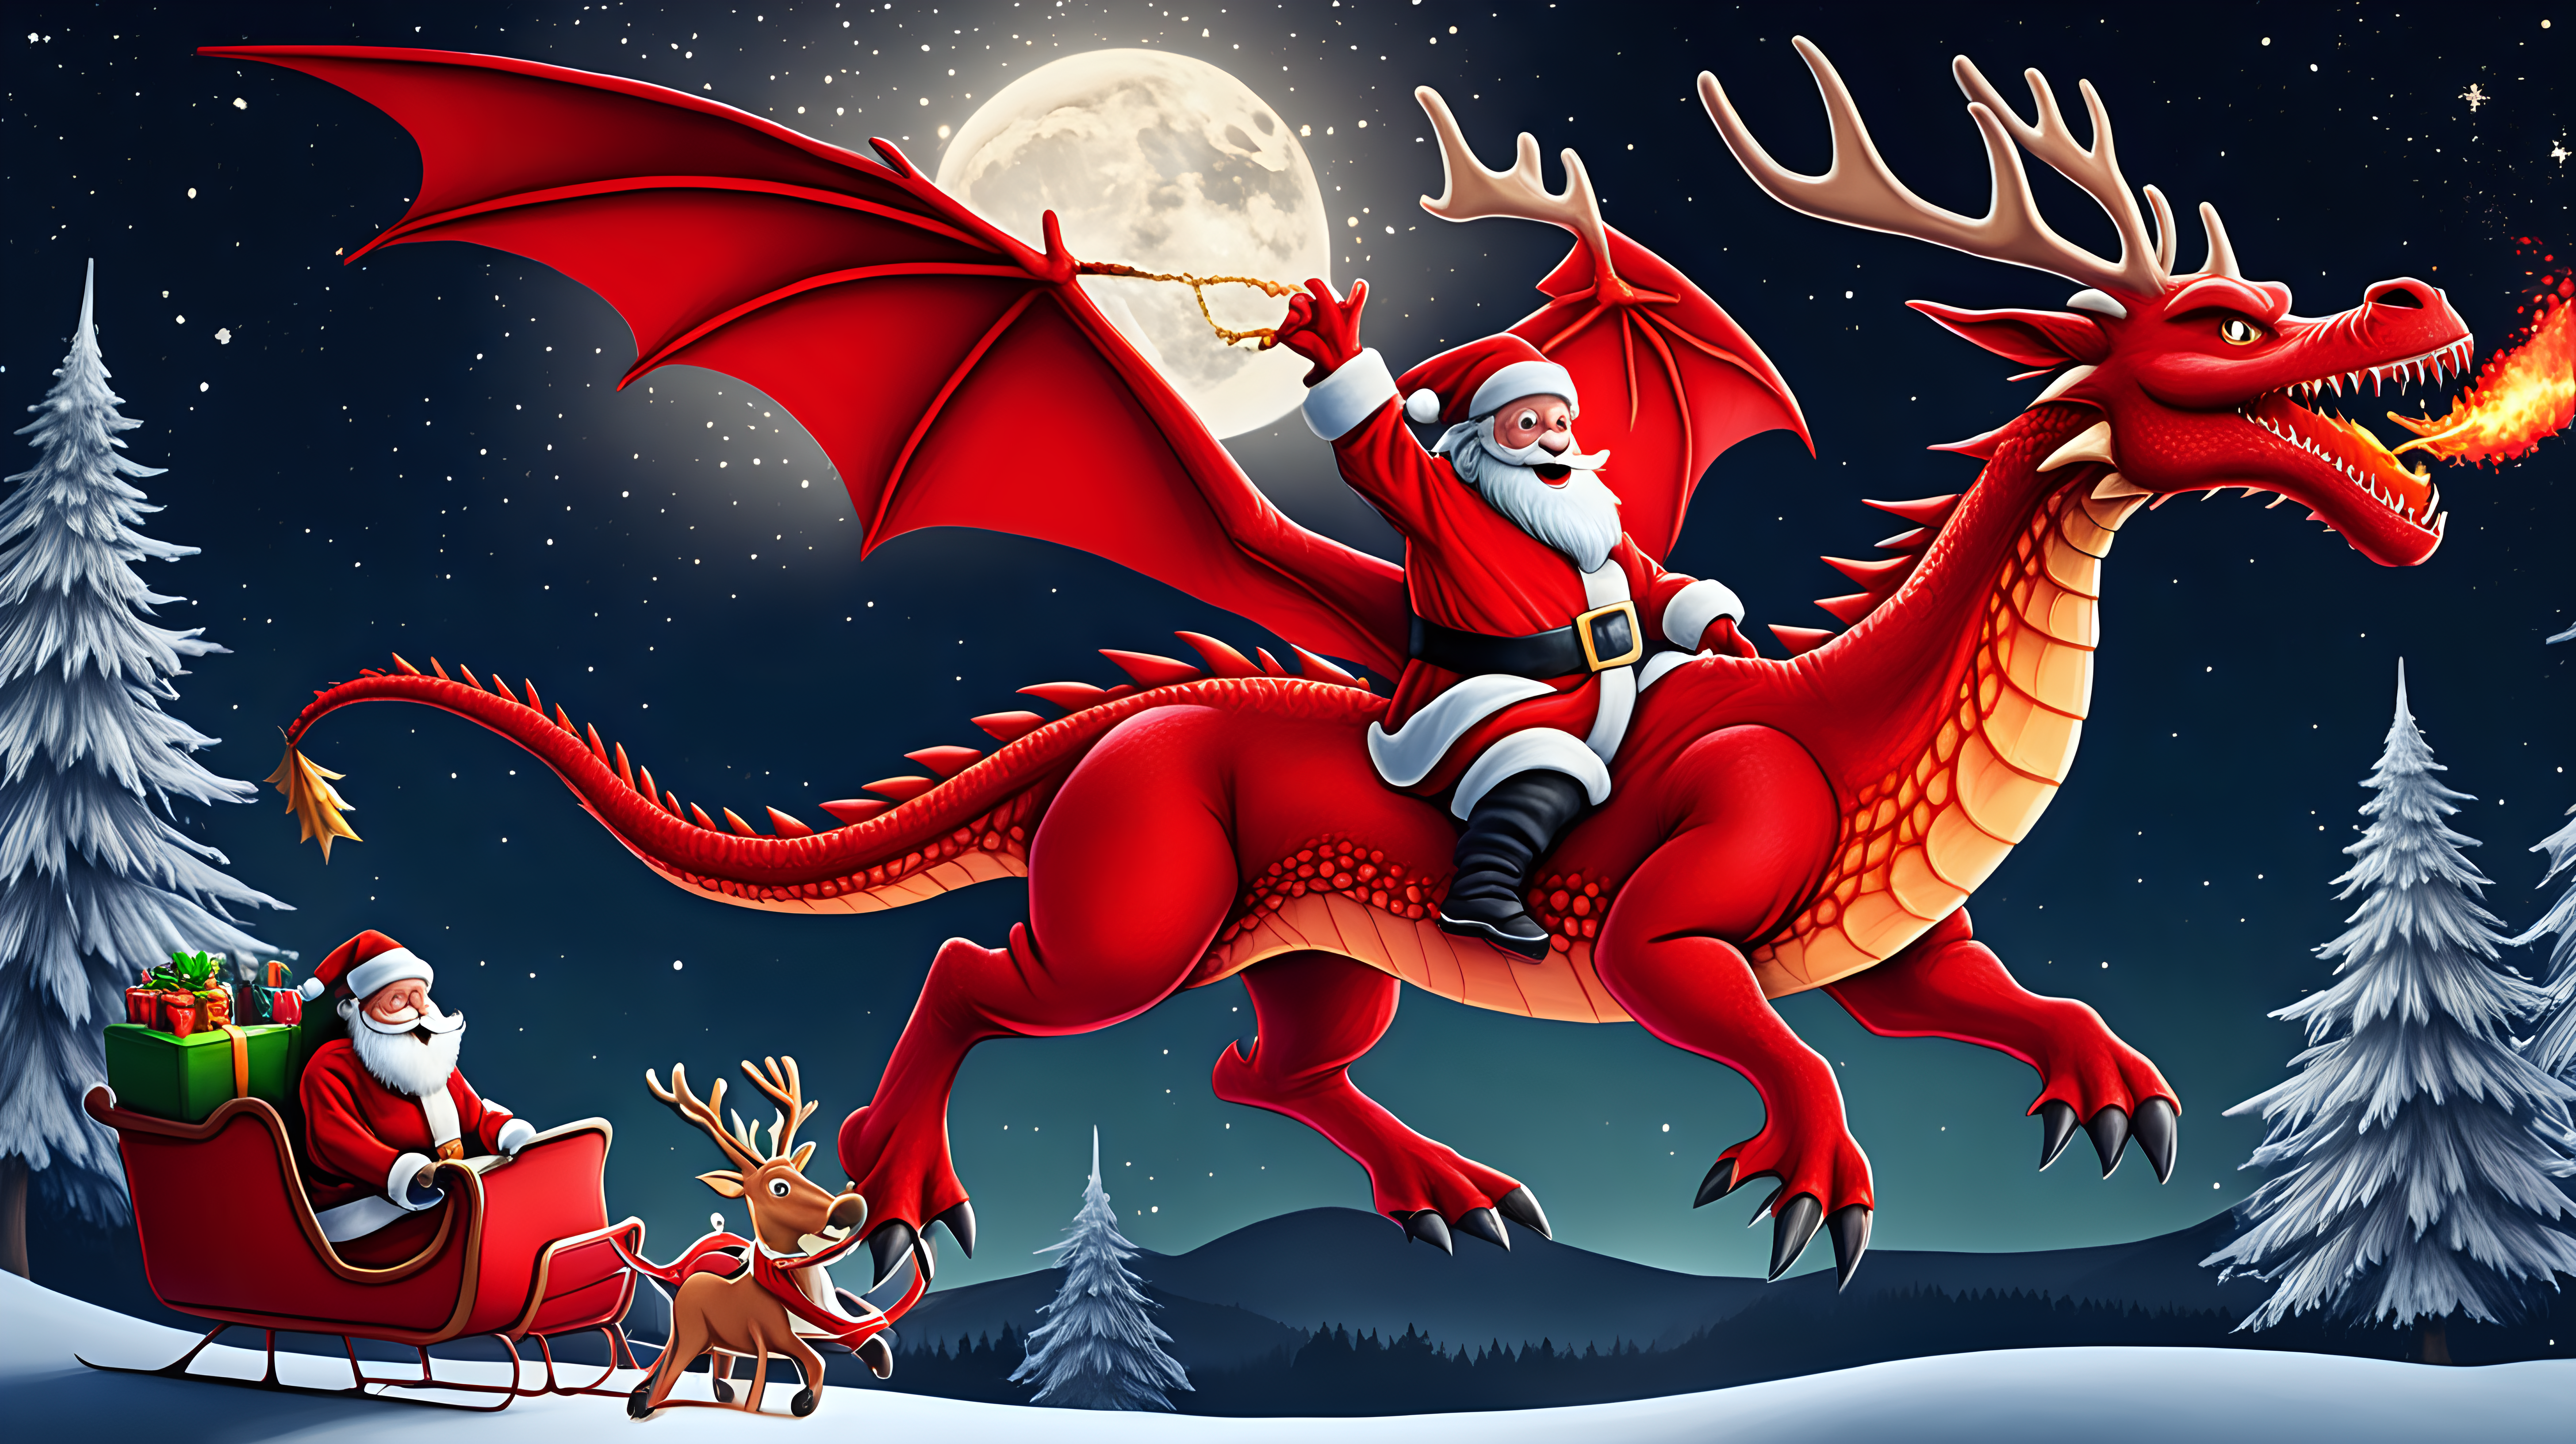 Red fire breathing dragon chasing Santa and his reindeer                                                in the night sky